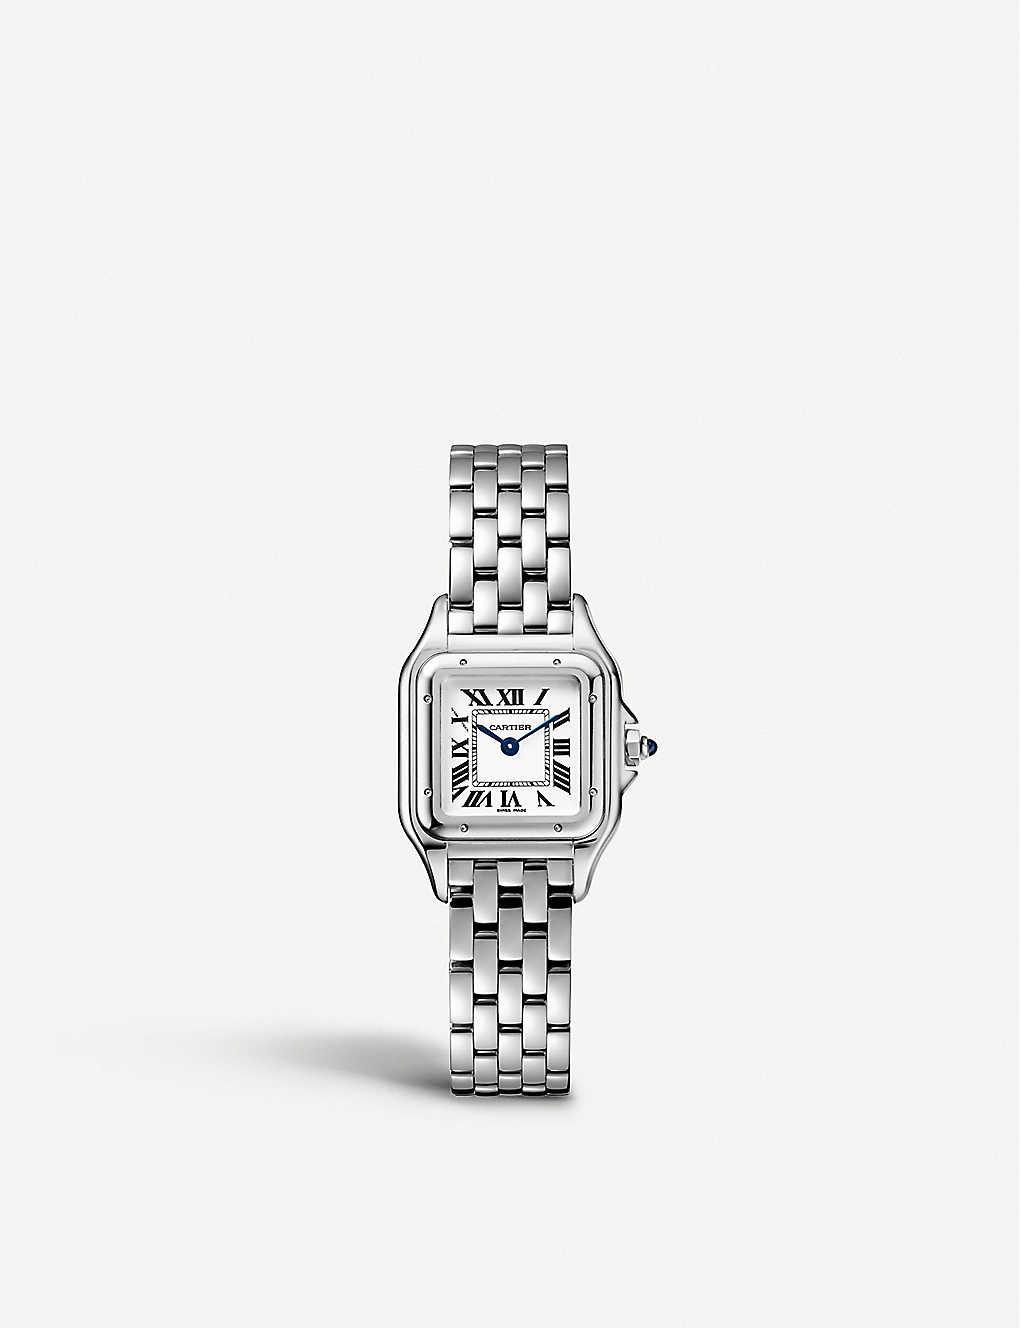 Cartier Crwspn0006 Panthère De Small Stainless Steel Watch in White